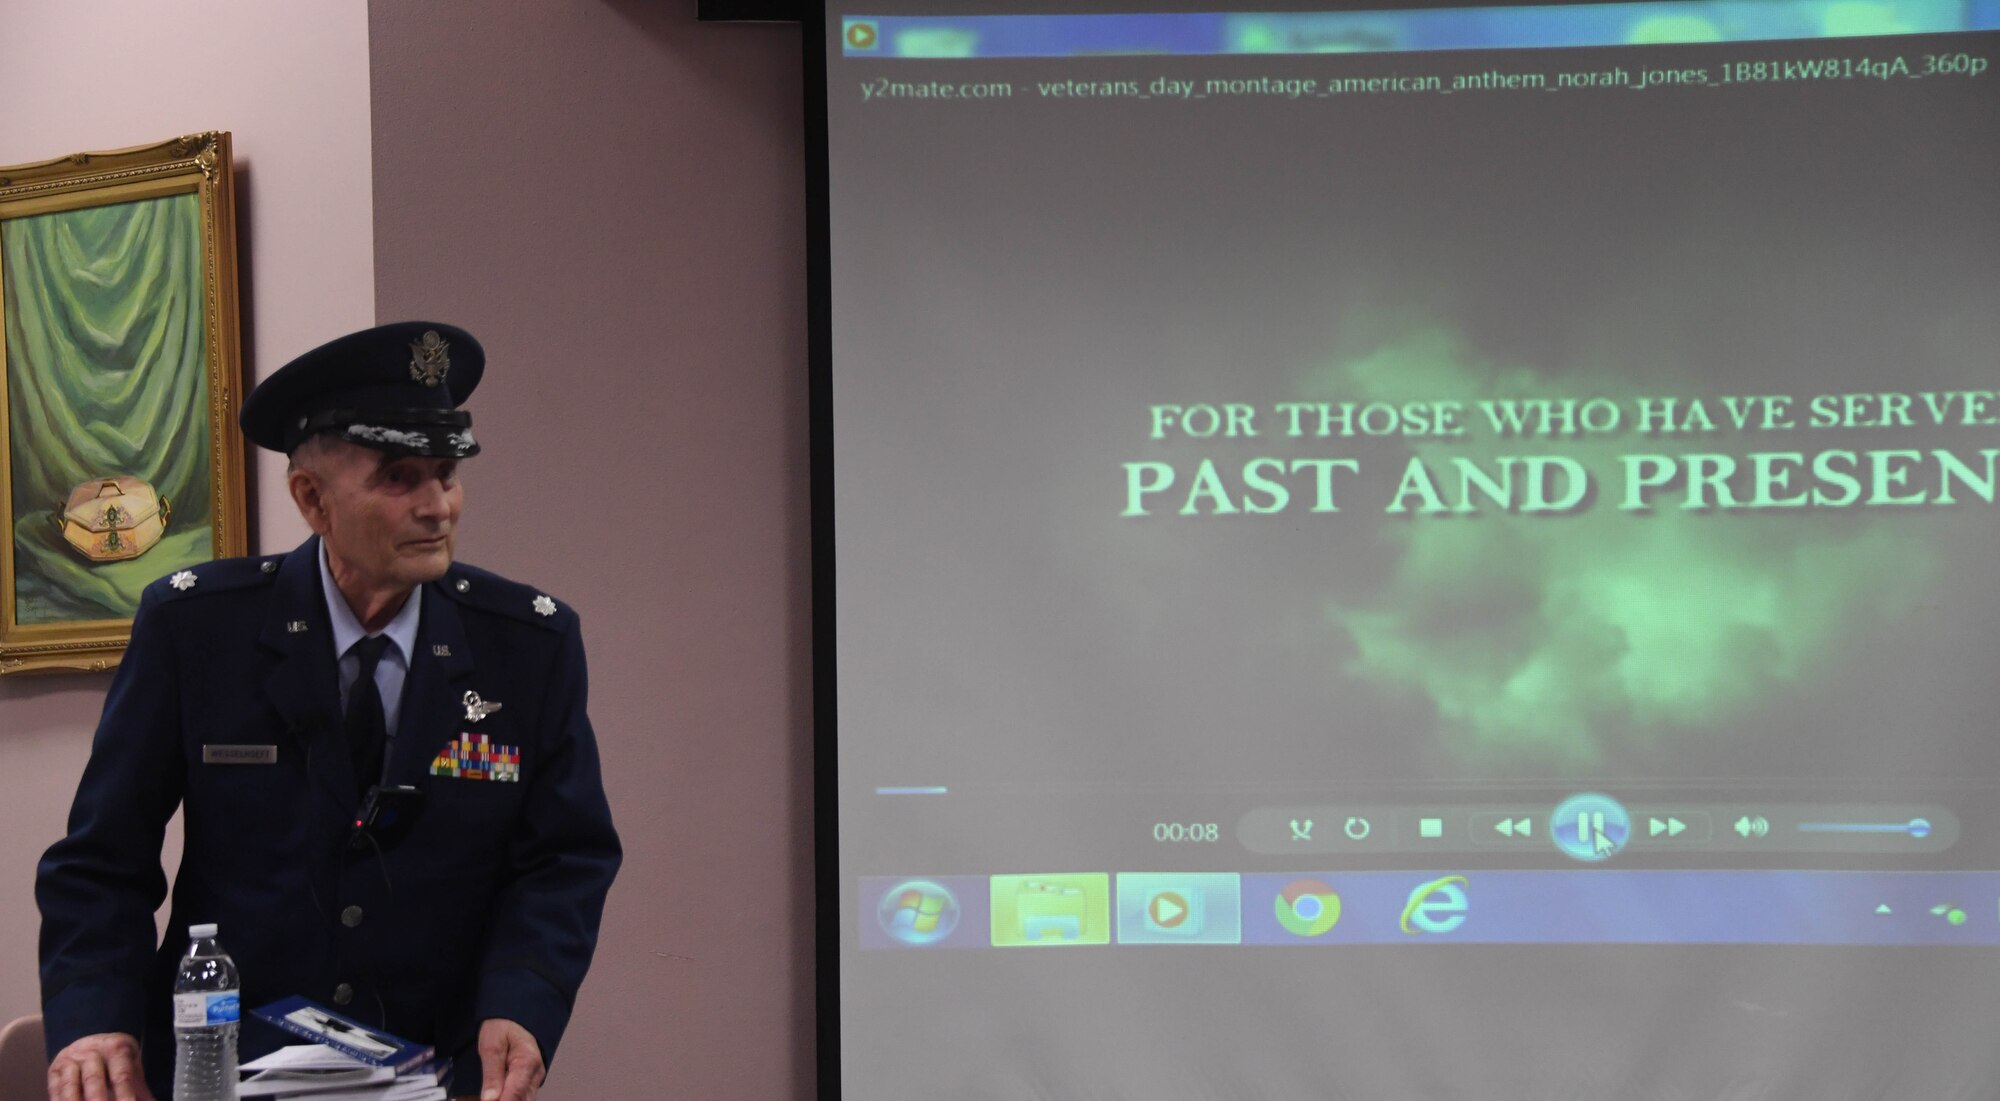 U.S. Air Force Lt. Col. Adolf Wesselhoeft tells what is was like growing up during the World War II and later as a member of 8th Air Force during a presentation at the History Center in Bossier City, La., Dec. 8, 2019. As a child of German immigrants (but born an American citizen), he and his parents were made to live in a U.S. internment camp during WW II until they were forced to return to Germany where they weathered severe bombings in Hamburg. Later on, Wesselhoeft returned to the U.S. and joined the military. He served as a photographer, navigator as well as a B-52 electronic warfare officer. He flew combat missions during the Vietnam War in the same unit (8th Air Force) that he lived through during WW II. Following Wesselhoeft' s address at the center, Lane Callaway, 8th Air Force historian, presented the veteran a letter of appreciation from Maj. Gen. James Dawkins Jr, current 8th Air Force commander, for his dedication and career service. (U.S. Air Force photo by Justin Oakes)